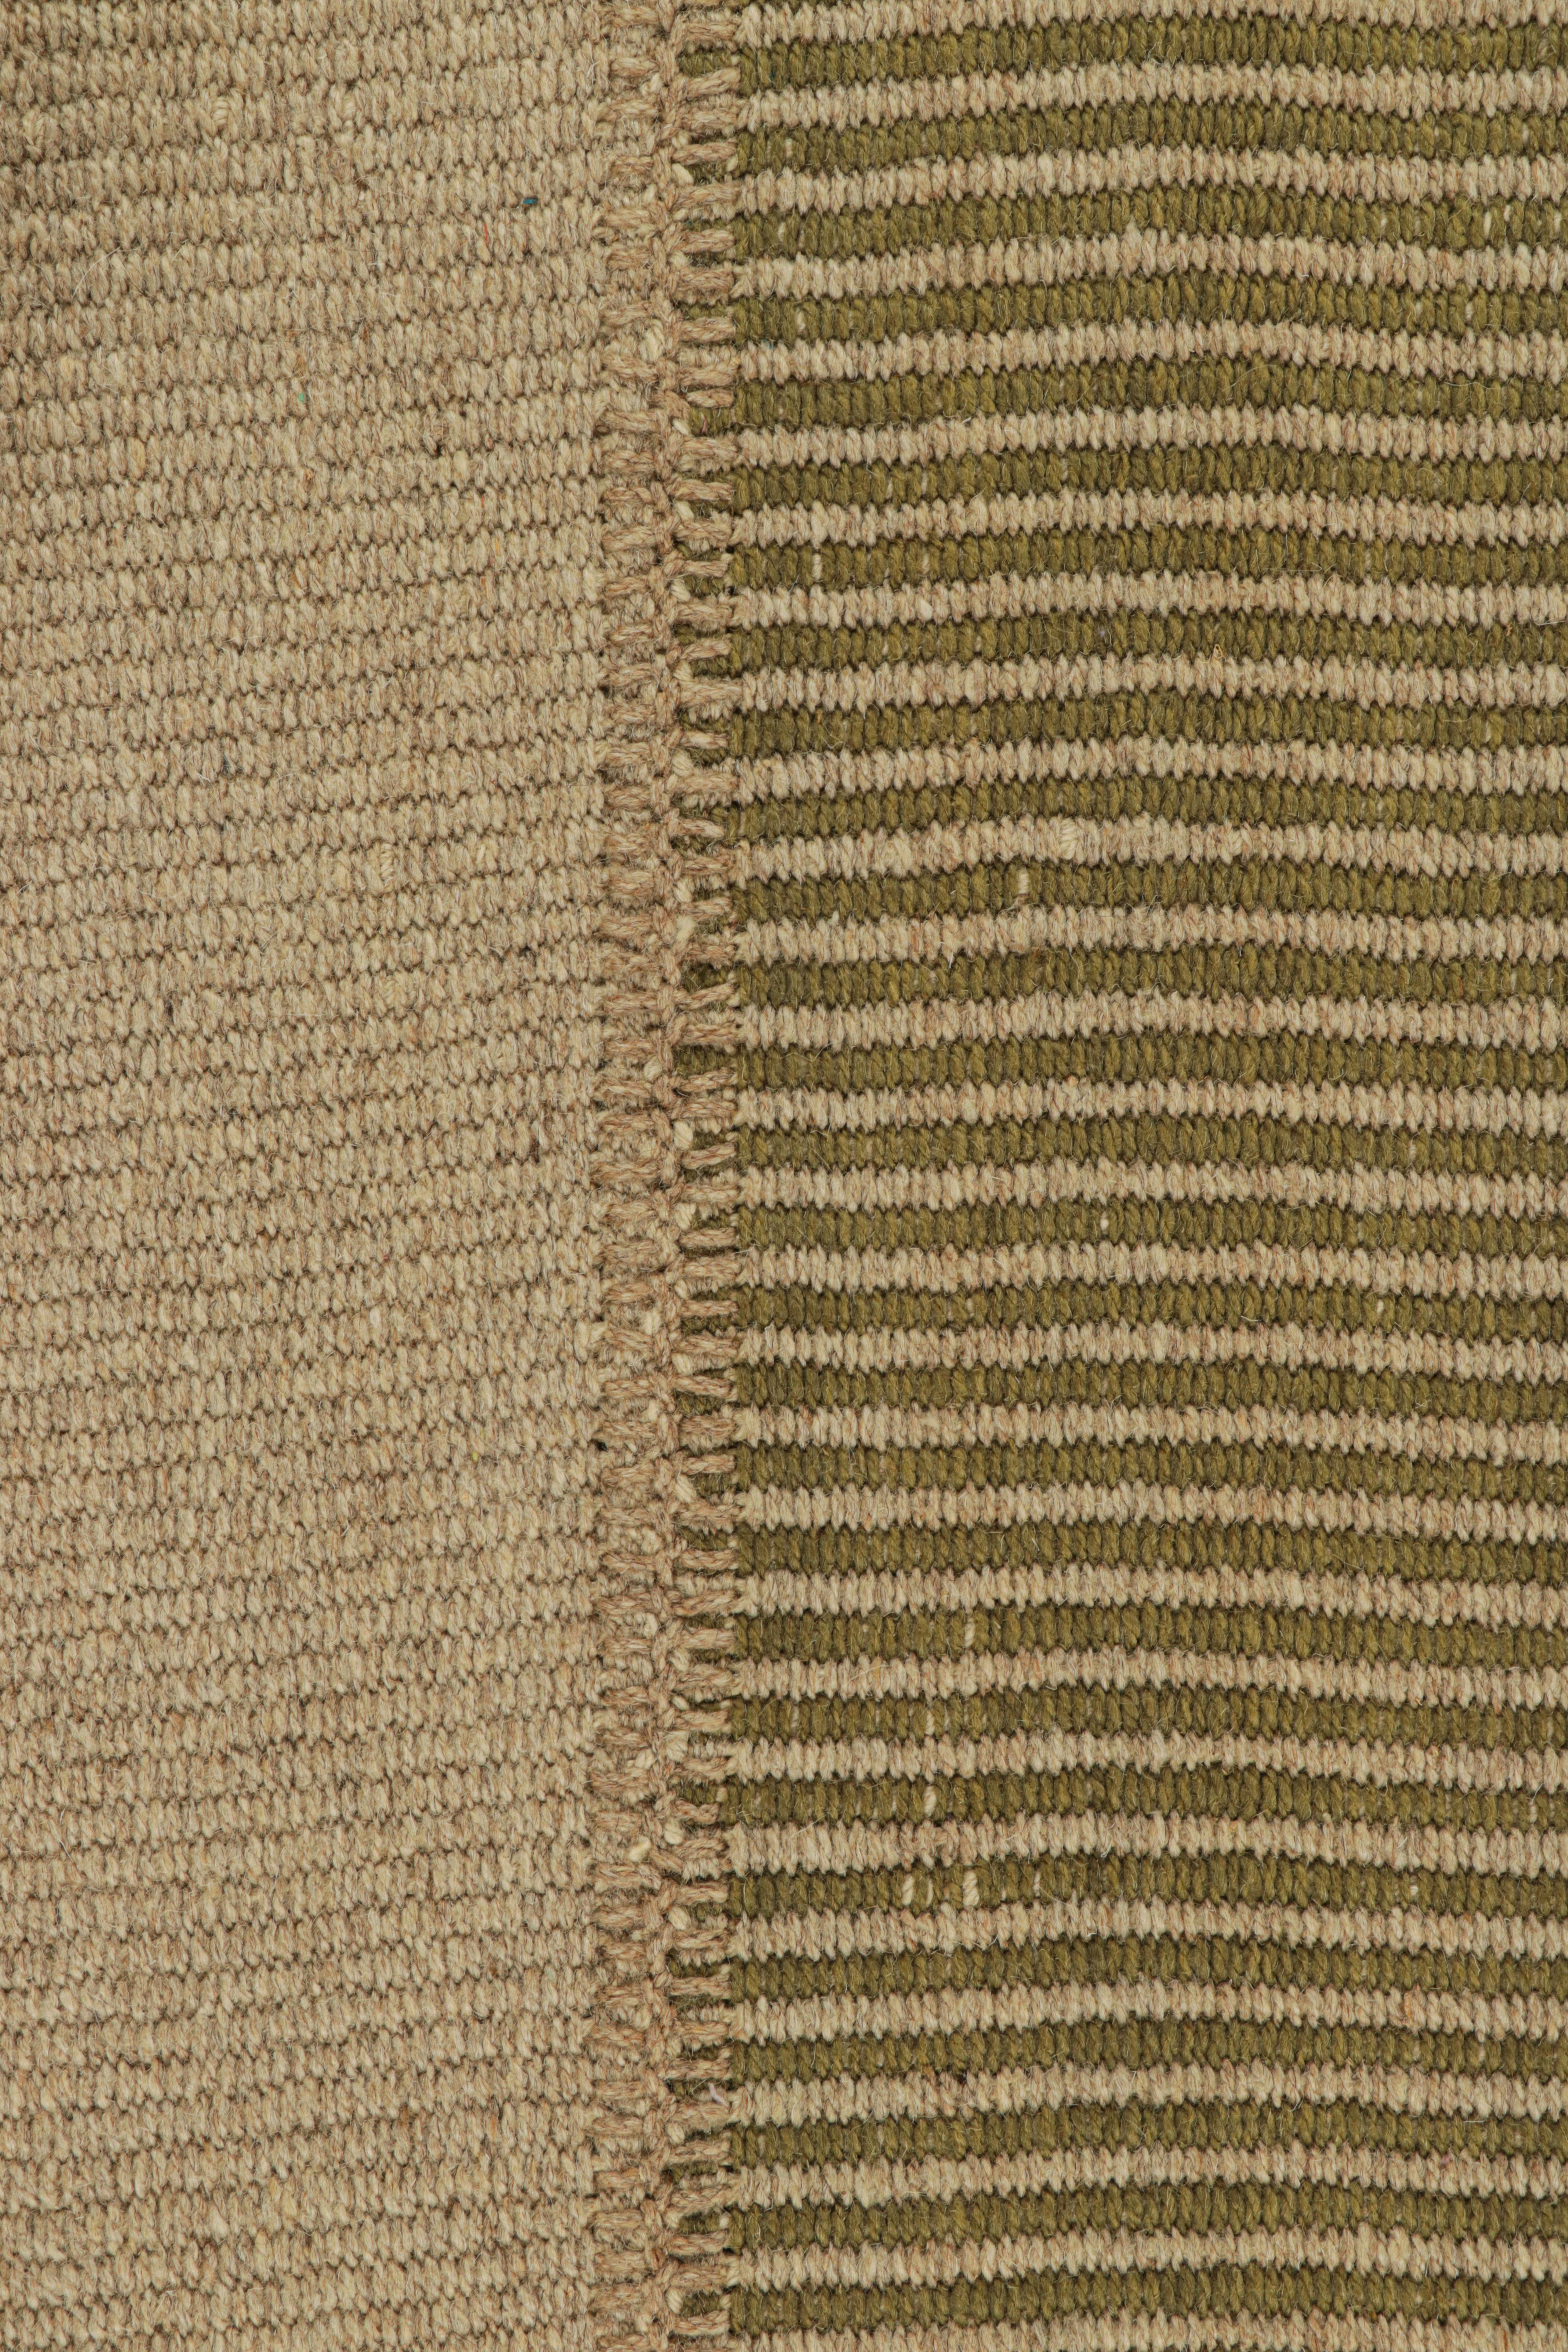 Modern Rug & Kilim’s Contemporary Kilim with Stripes in Green and Beige-Brown Accents For Sale